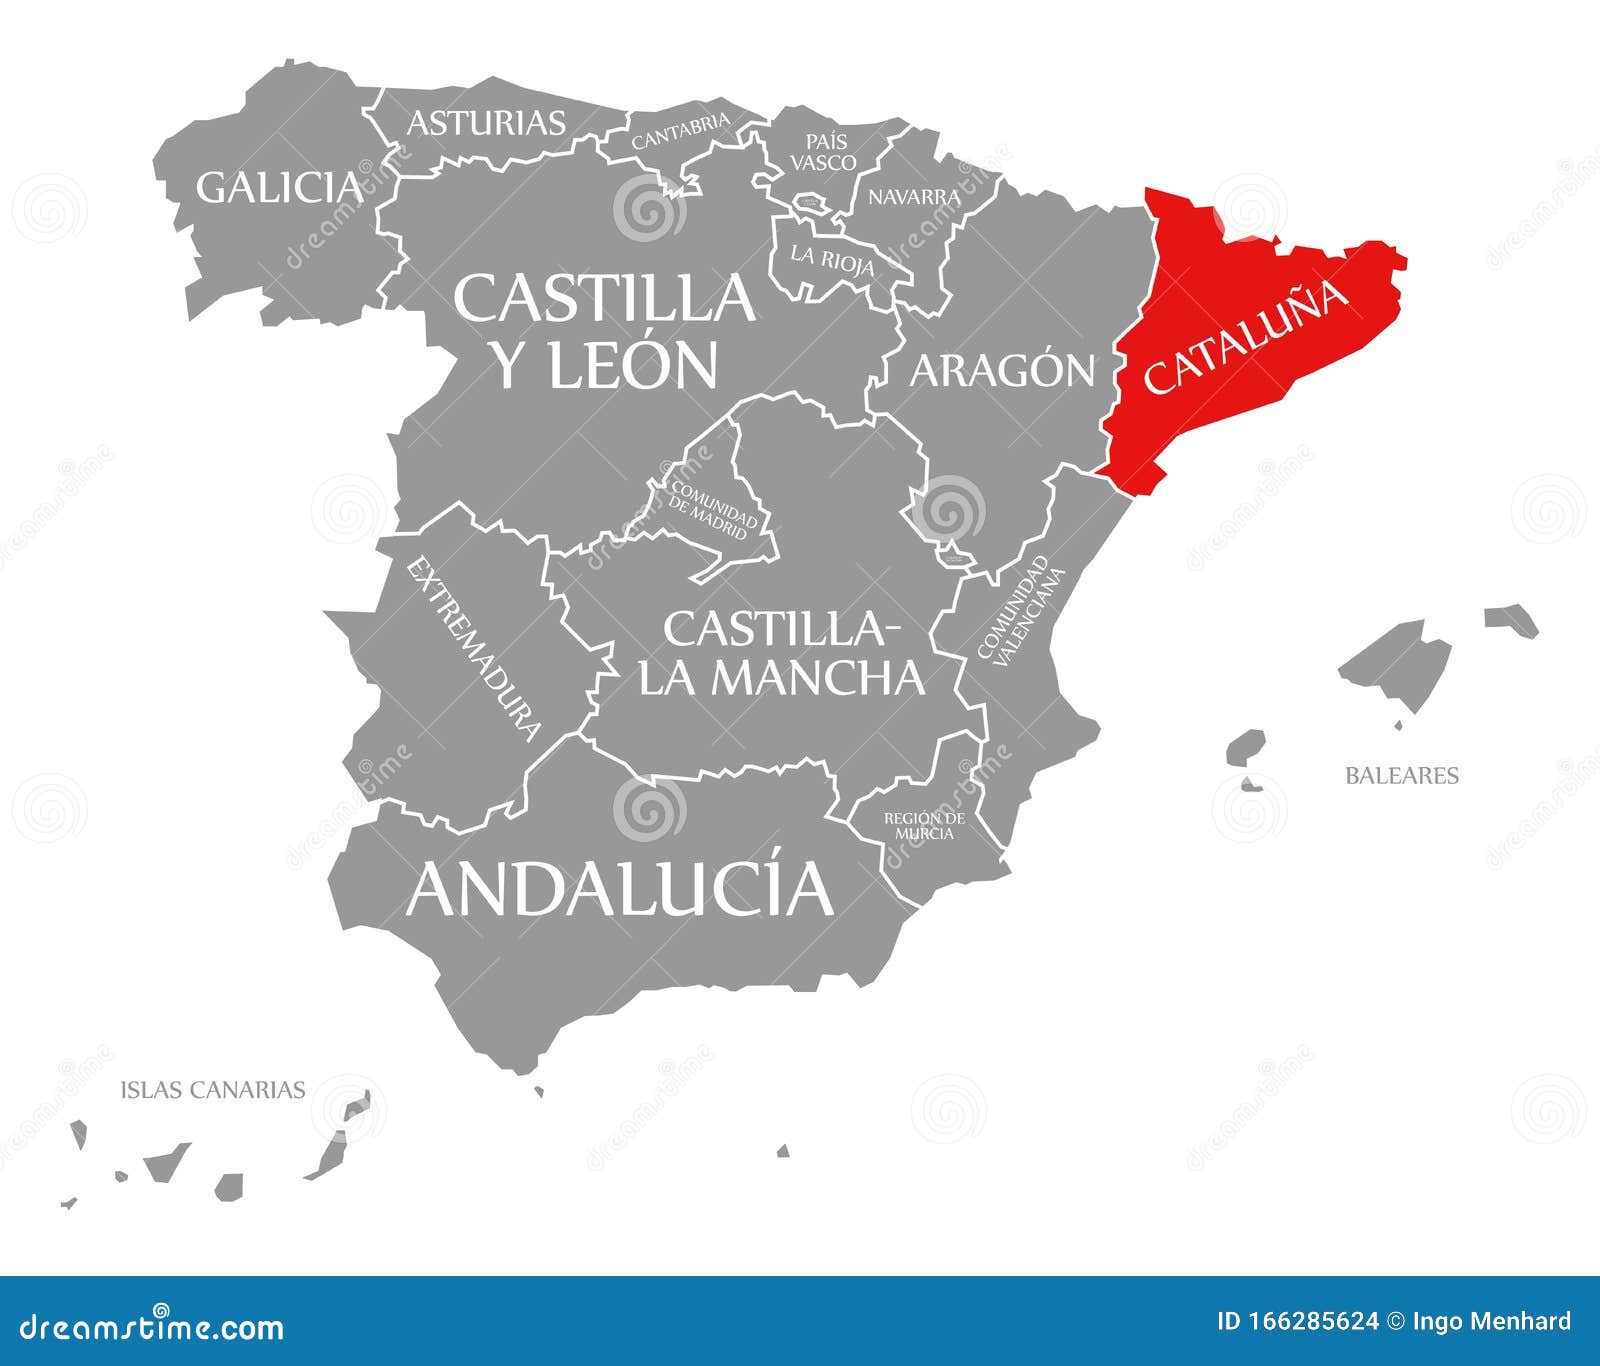 cataluna red highlighted in map of spain